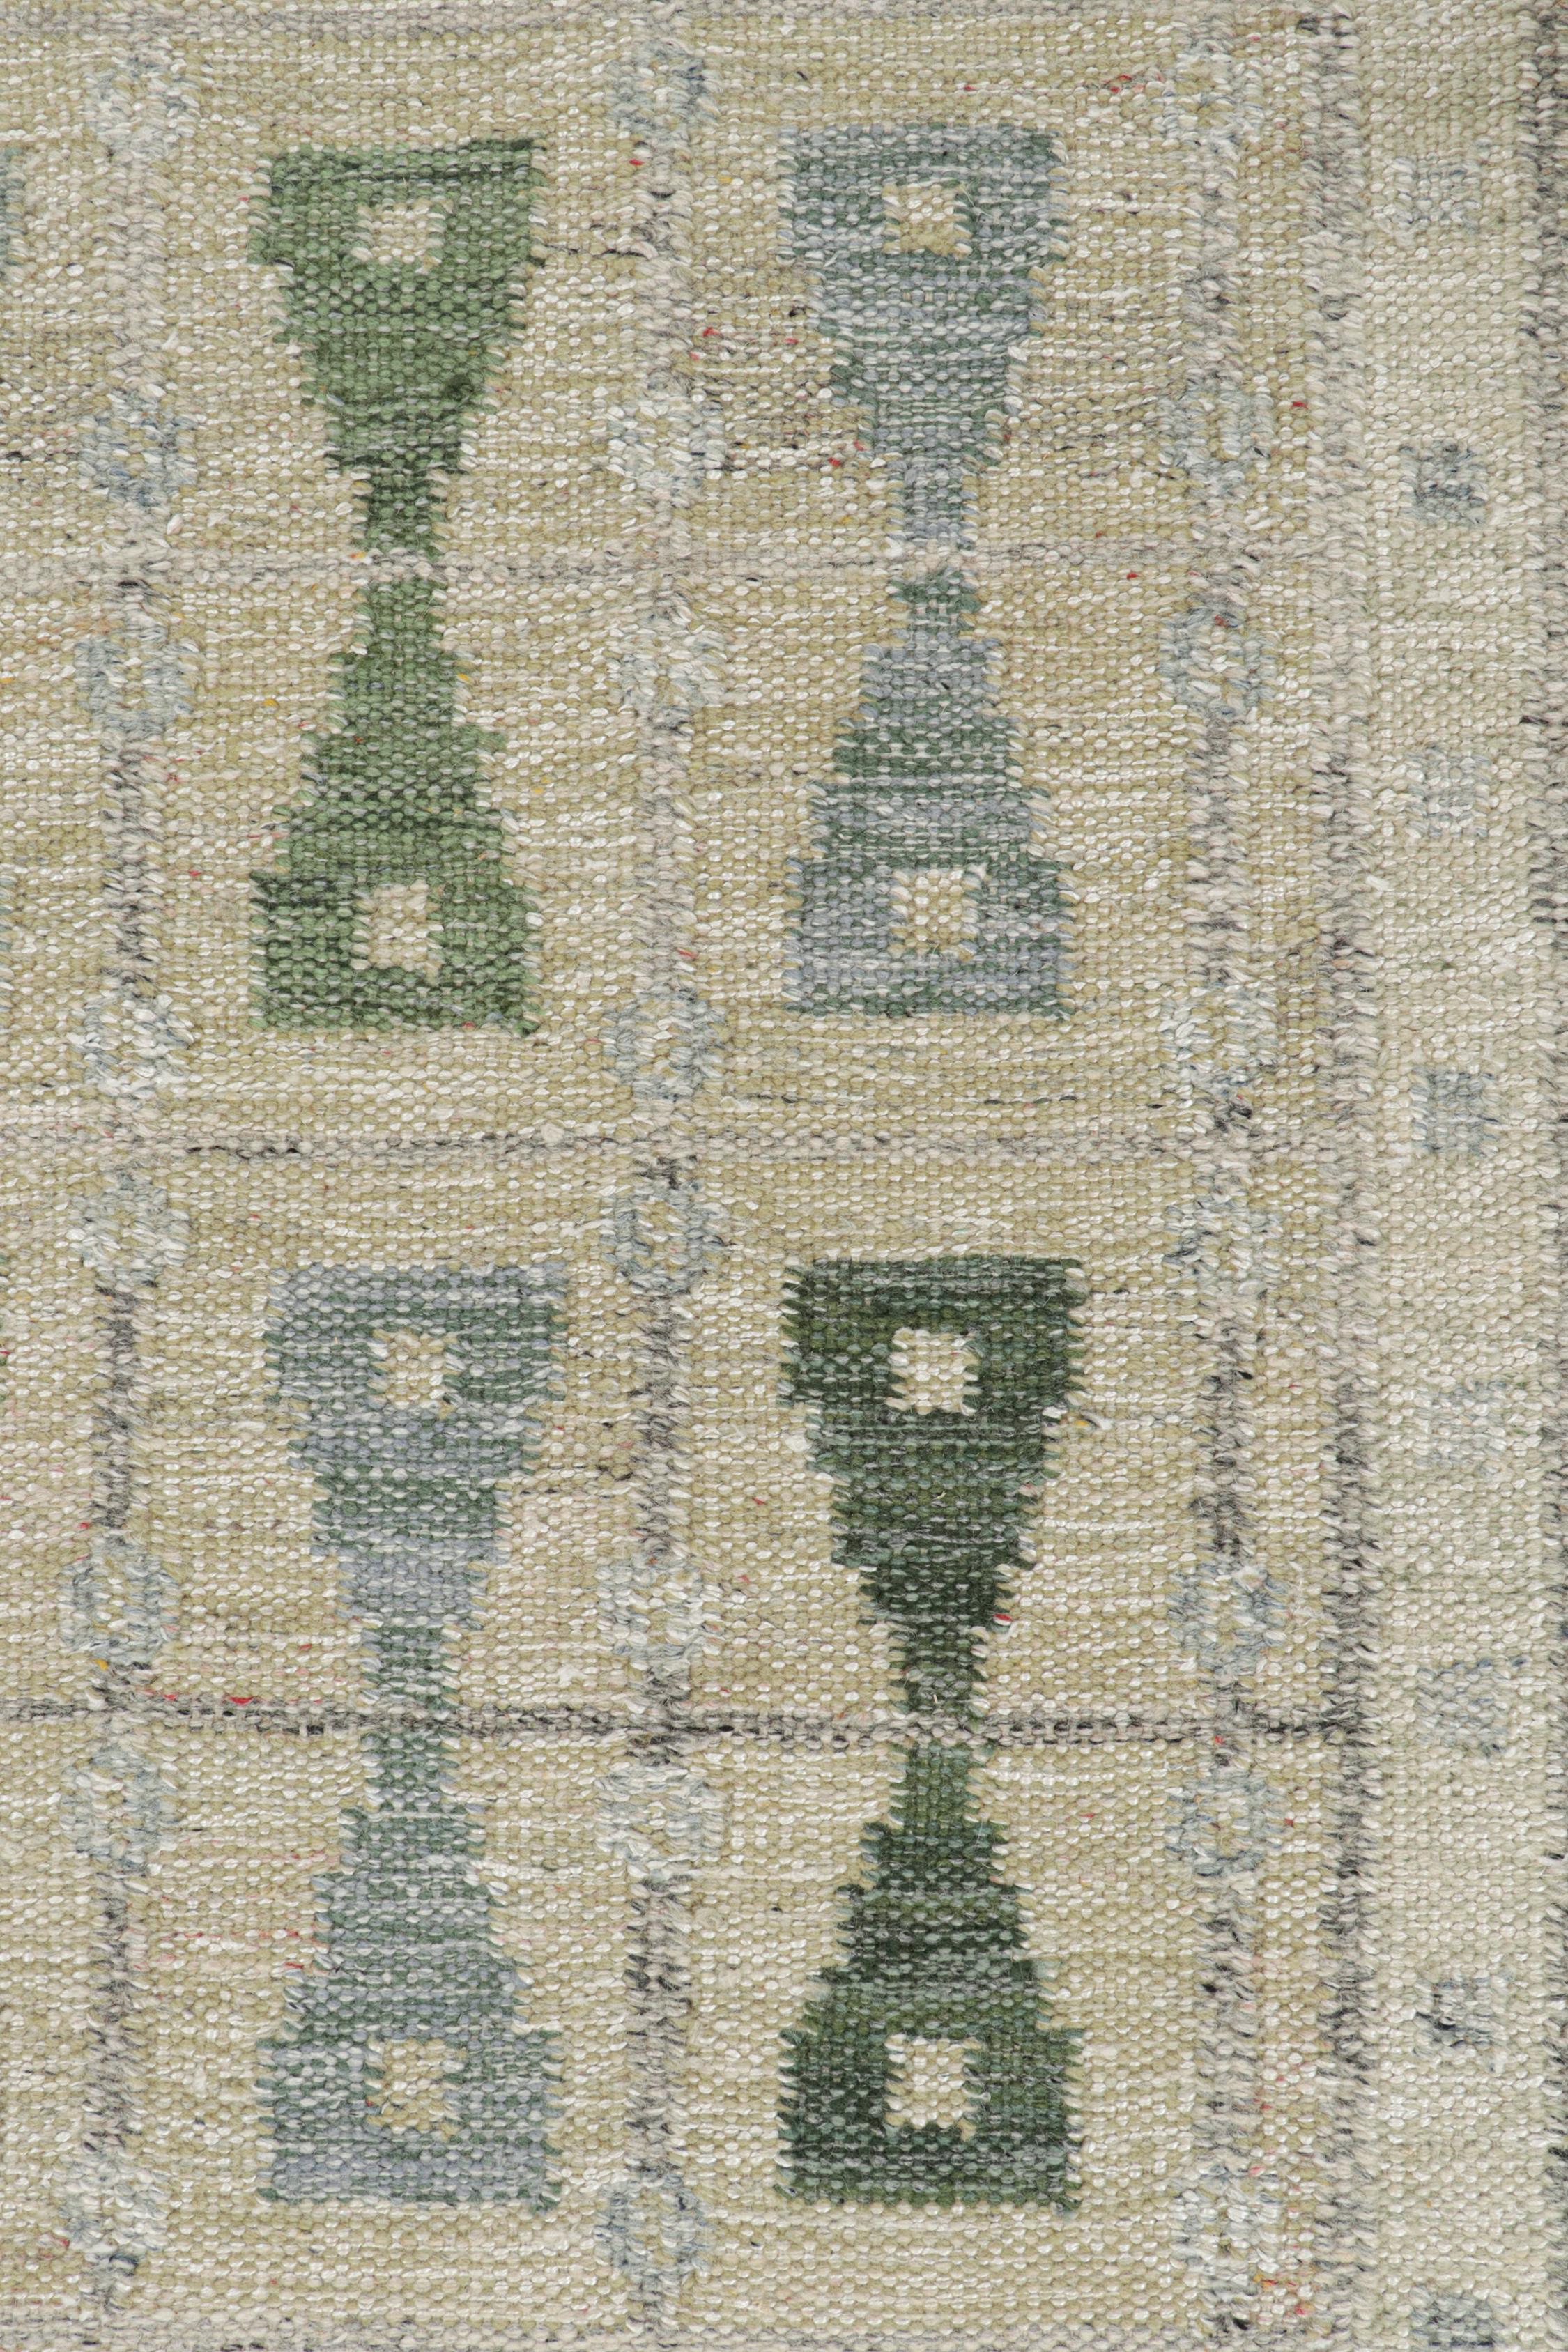 Rug & Kilim’s Scandinavian Style Kilim Runner in Beige with Geometric Patterns In New Condition For Sale In Long Island City, NY